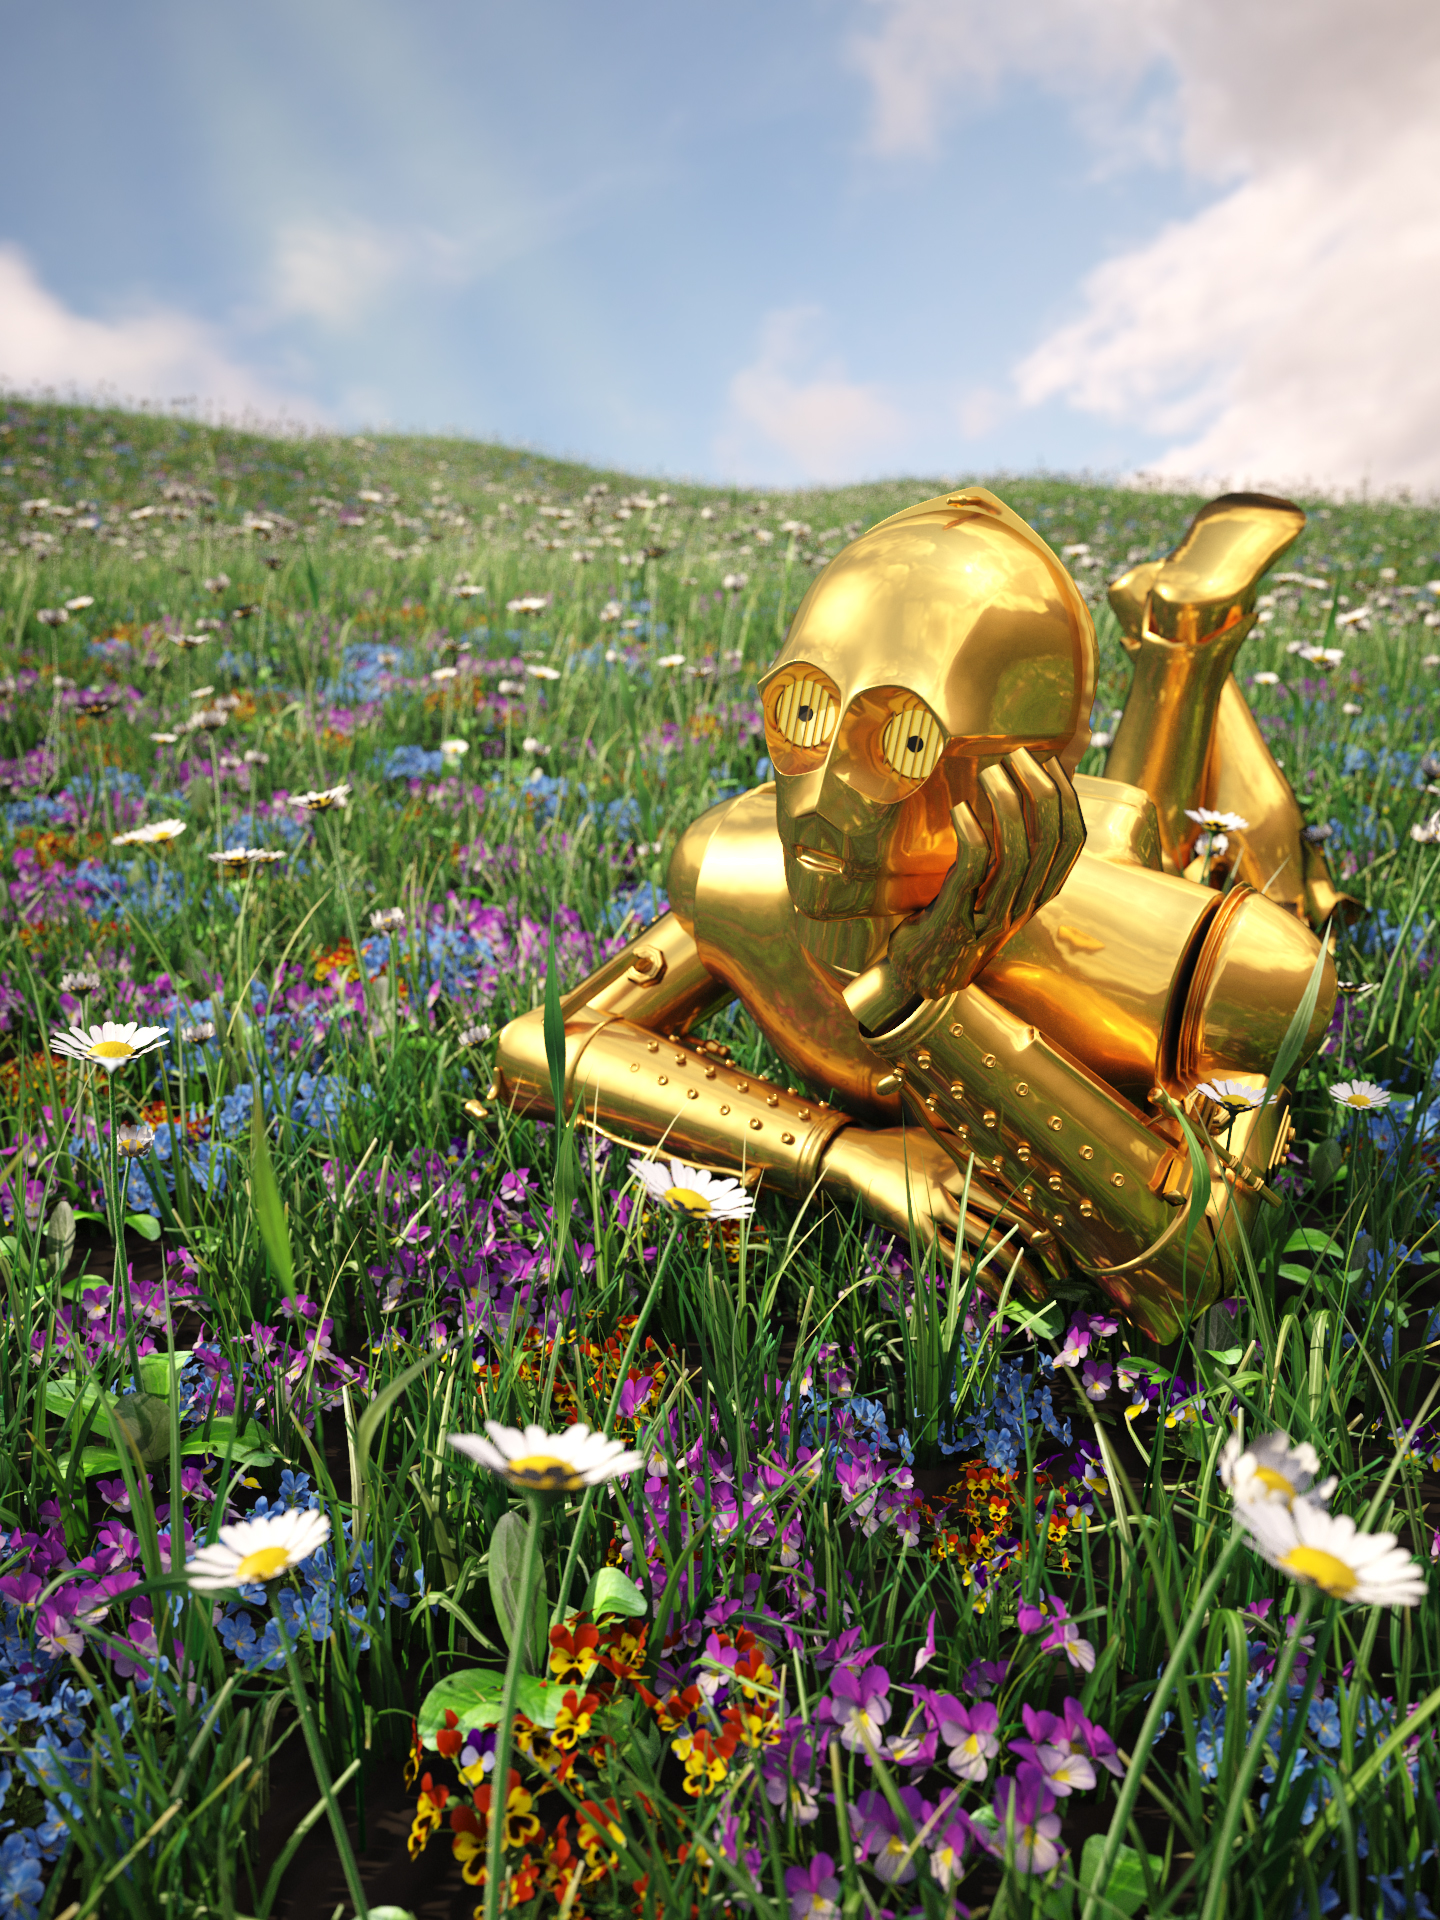 C-3PO Laying In A Field